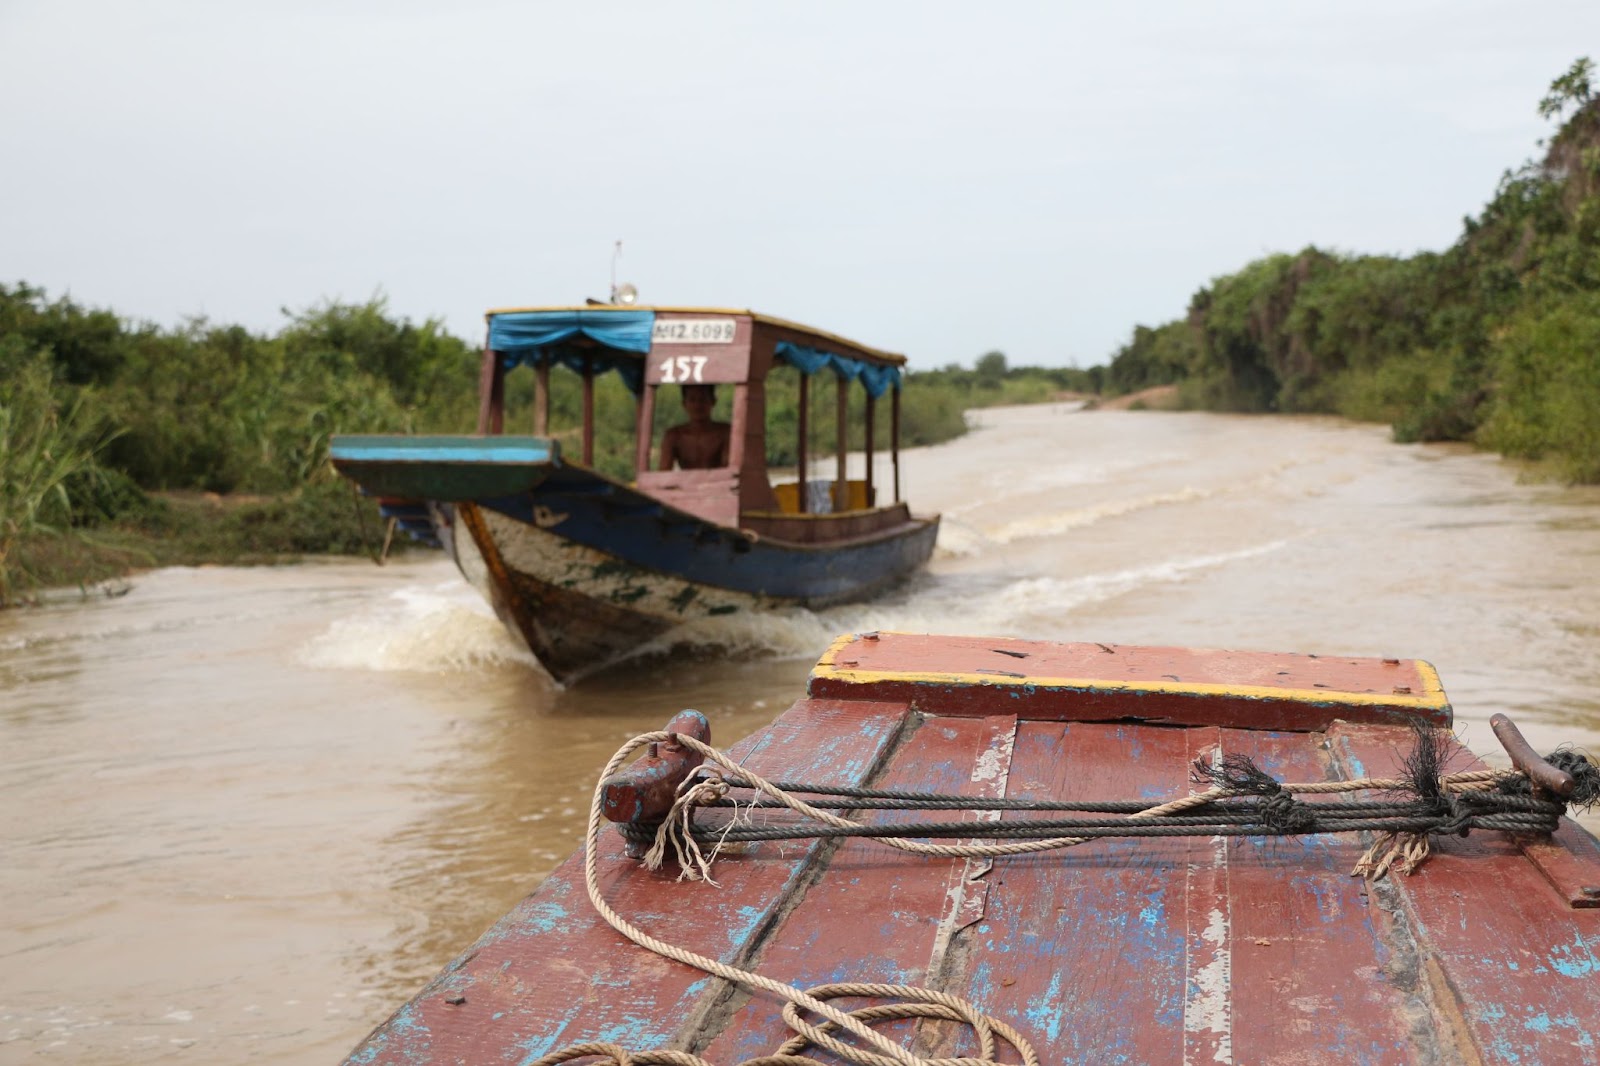 This was our view on our boat ride to the mighty Tonle Sap.